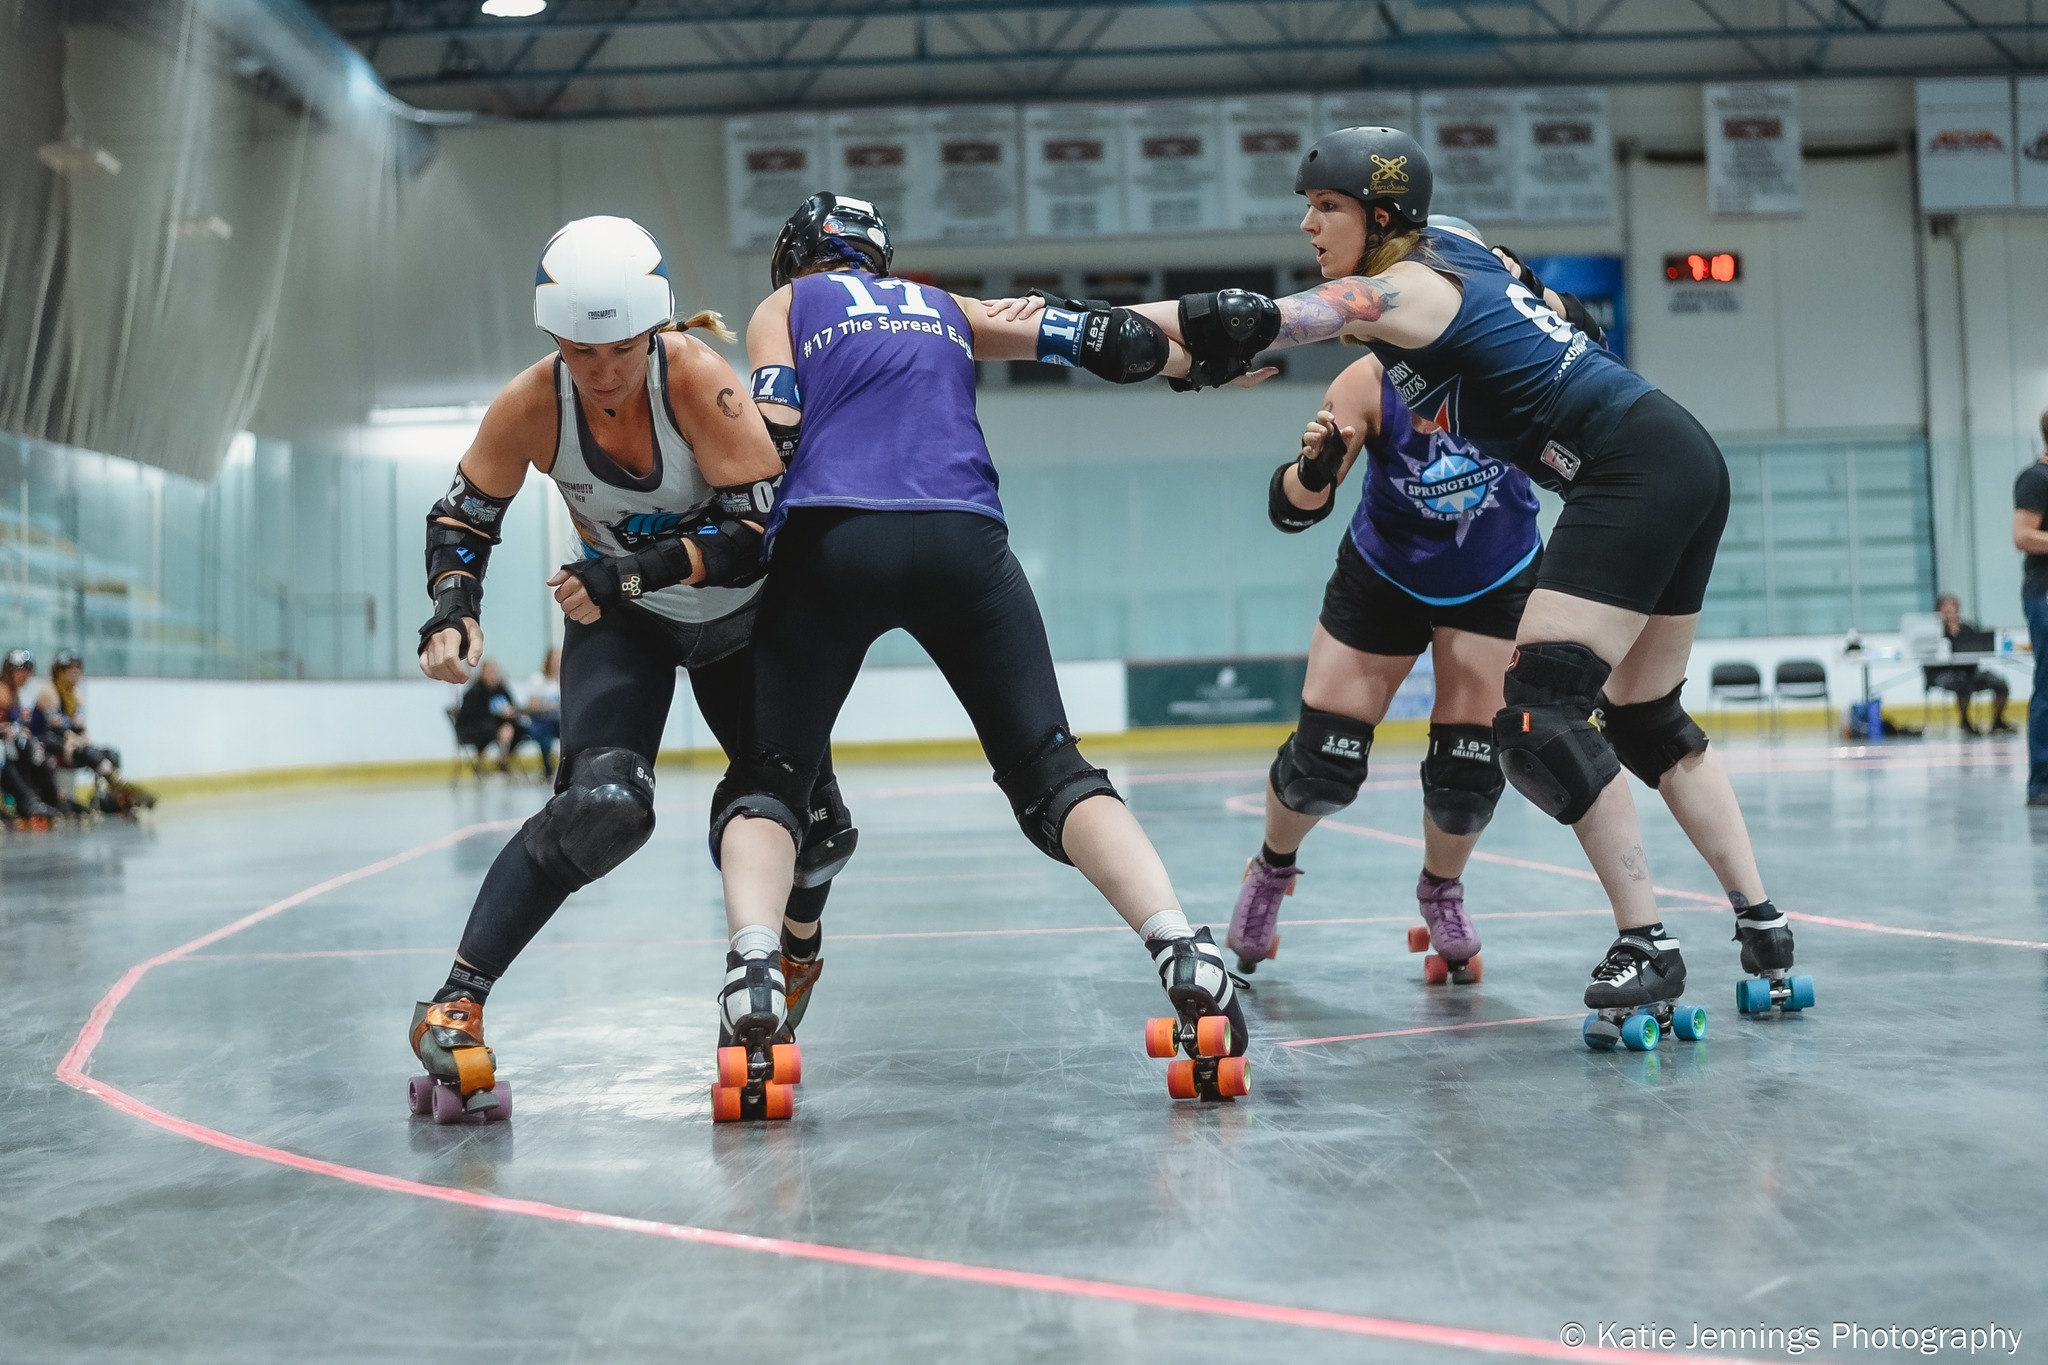 Springfield Roller Derby's Show-Me Skate Invitational features open-gender mashup bout